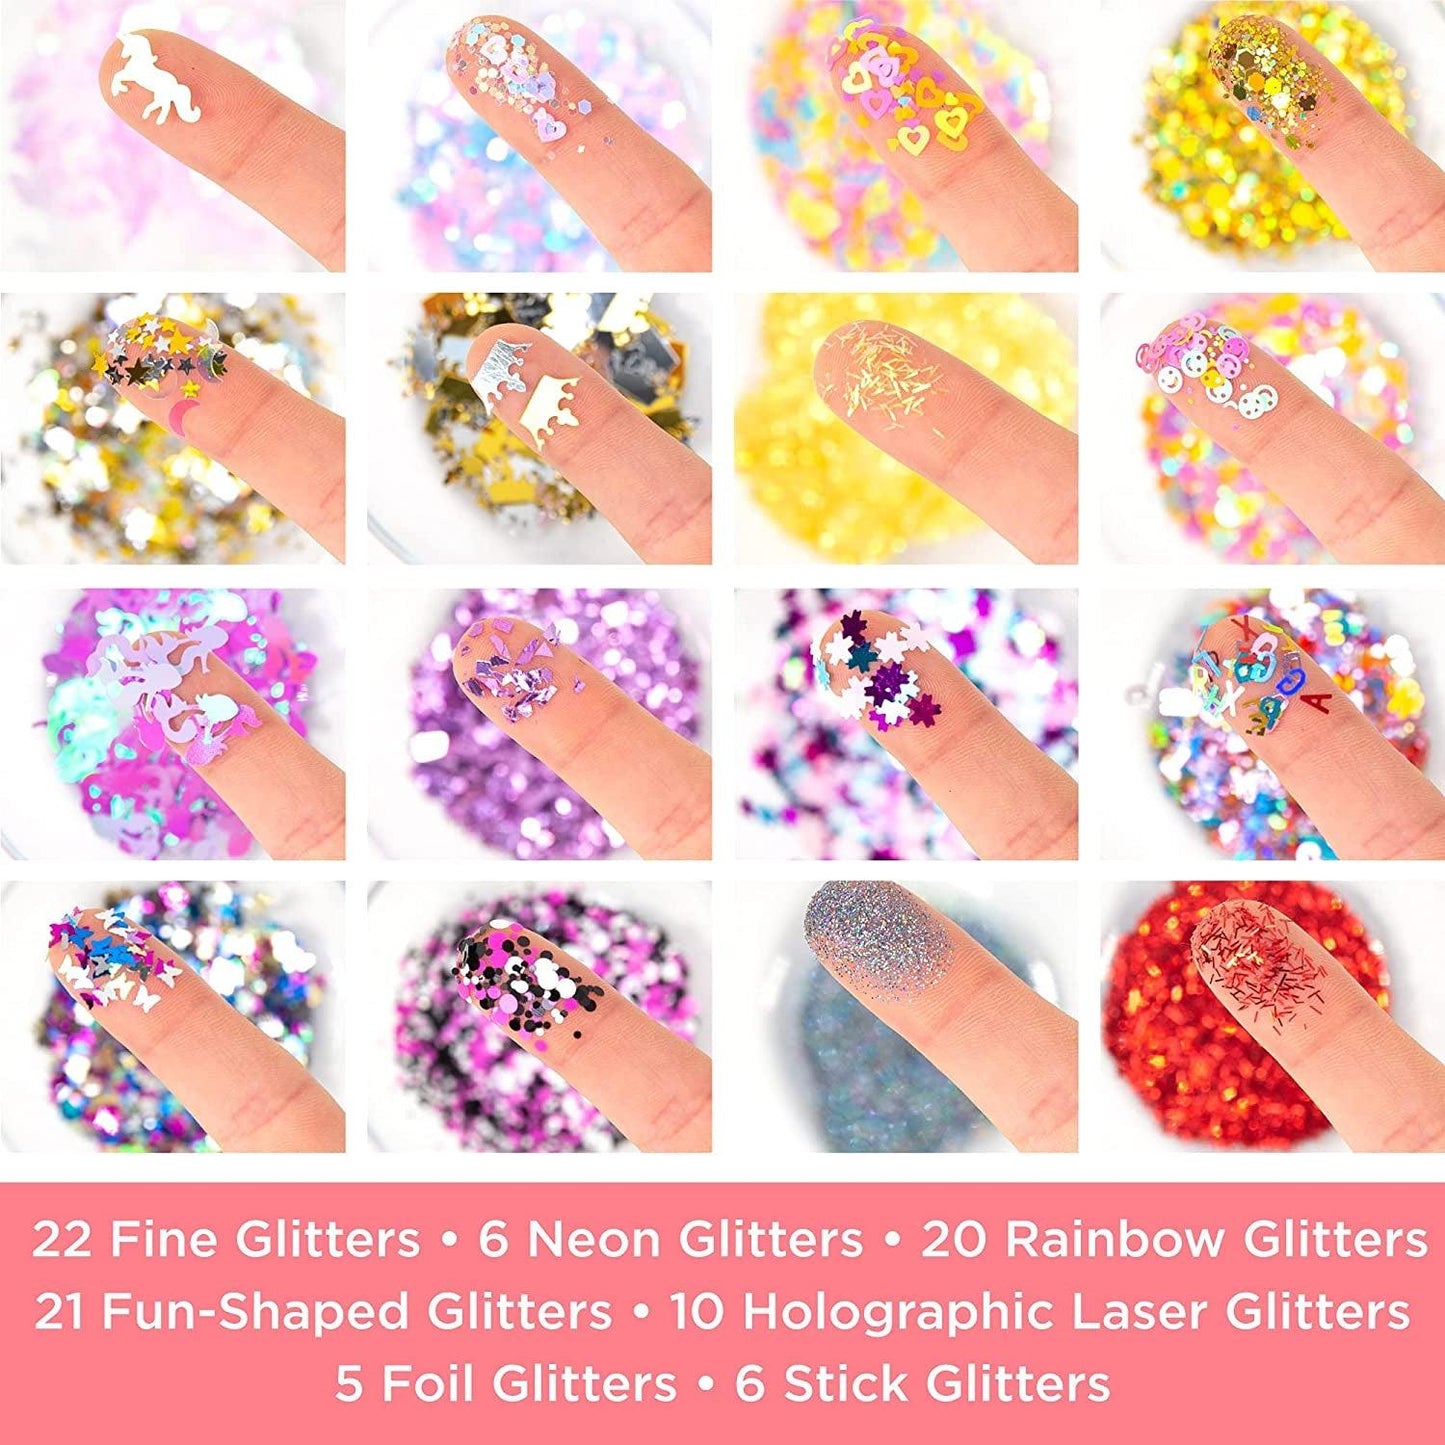 Assorted Glitter 90 Pack, Includes Fine, Neon Glitter, Shapes, Foil Glitter & More, Great for Resin Projects, Group Arts and Crafts, DIY Projects, Back to School Supplies & Art Class - WoodArtSupply